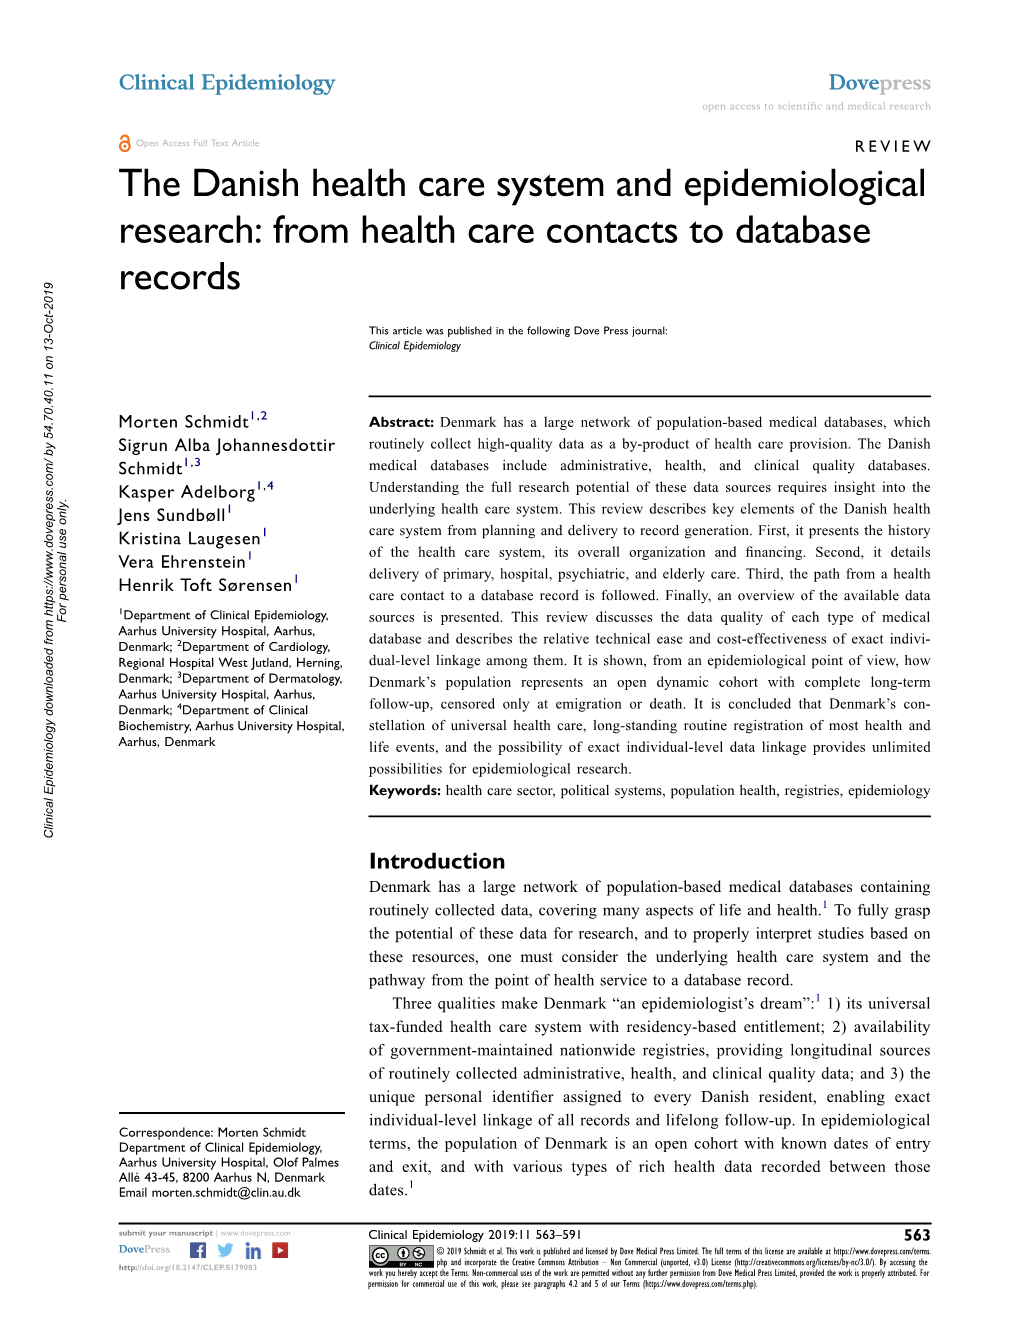 The Danish Health Care System and Epidemiological Research: from Health Care Contacts to Database Records